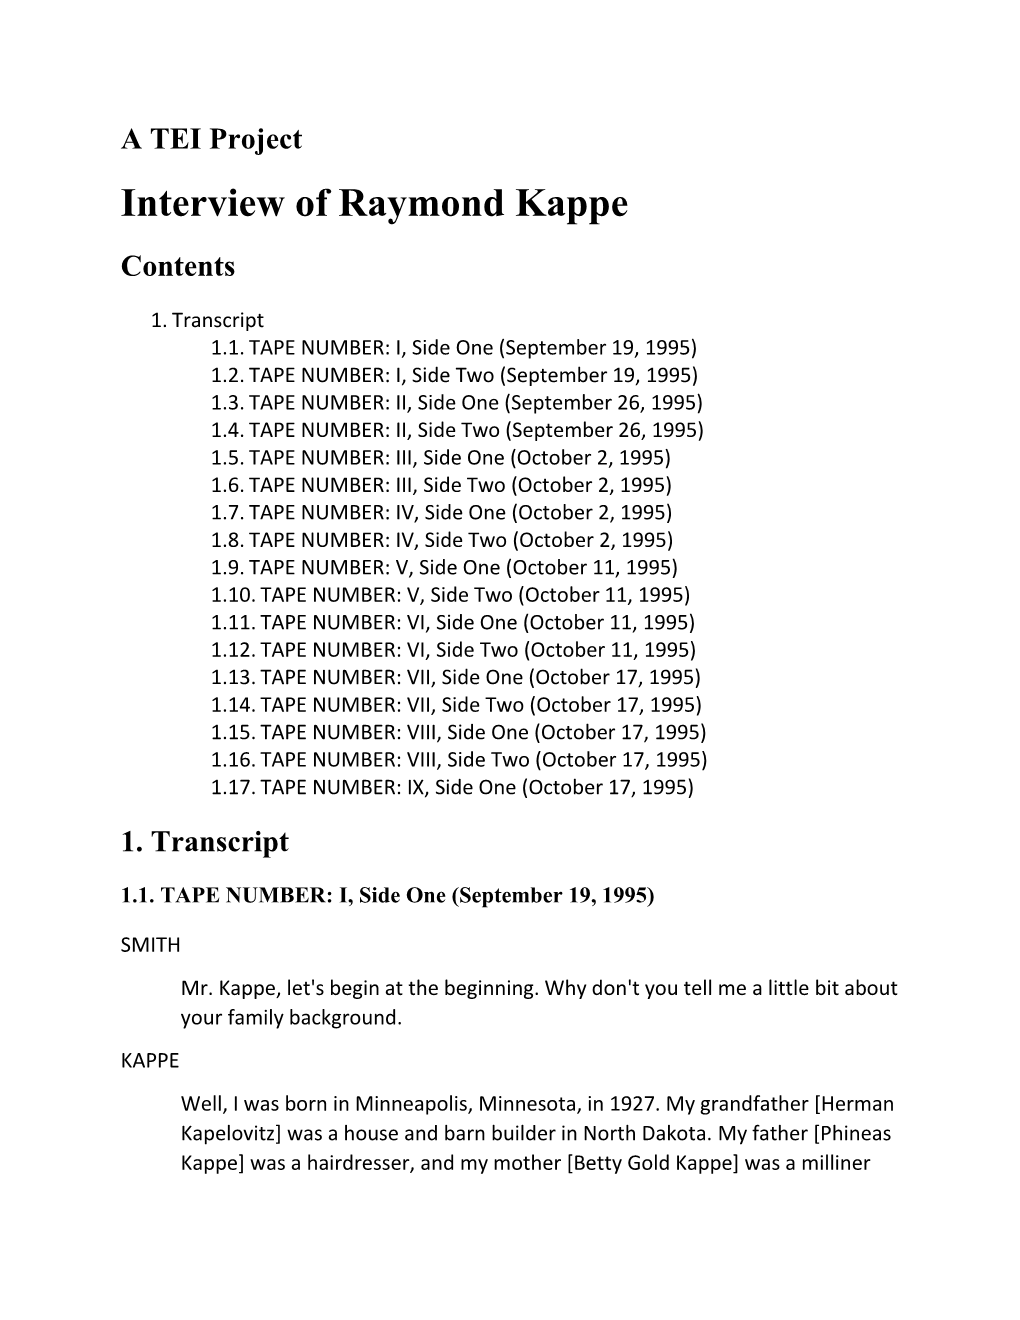 Oral History with Ray Kappe